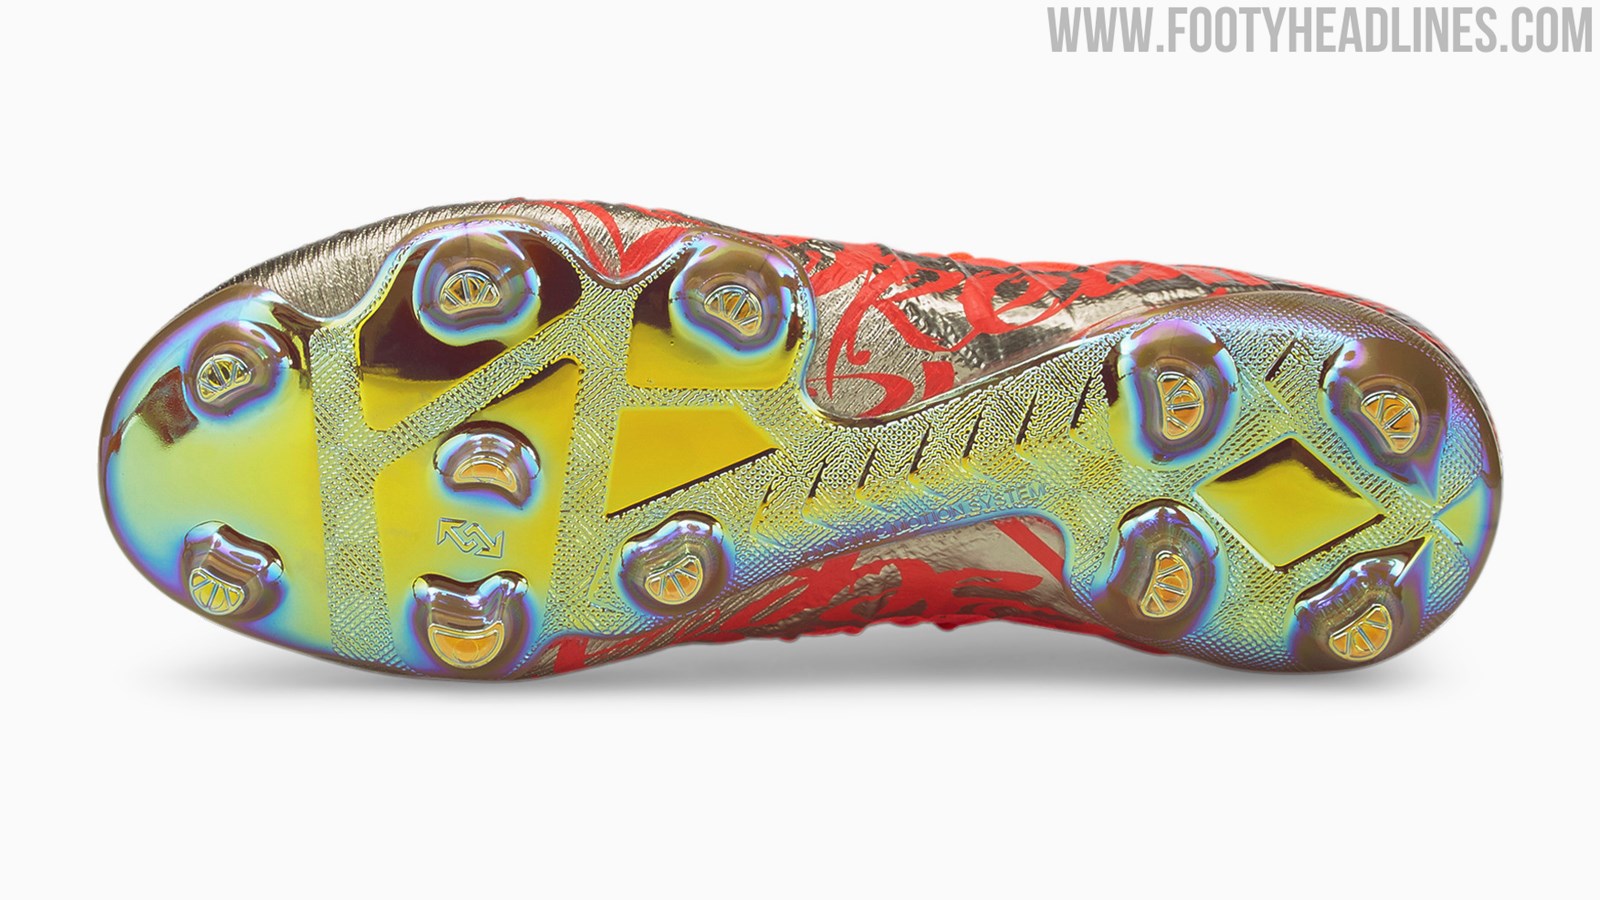 Puma Future Neymar 'Dream Chaser' 2022 World Cup Signature Boots Released -  Footy Headlines